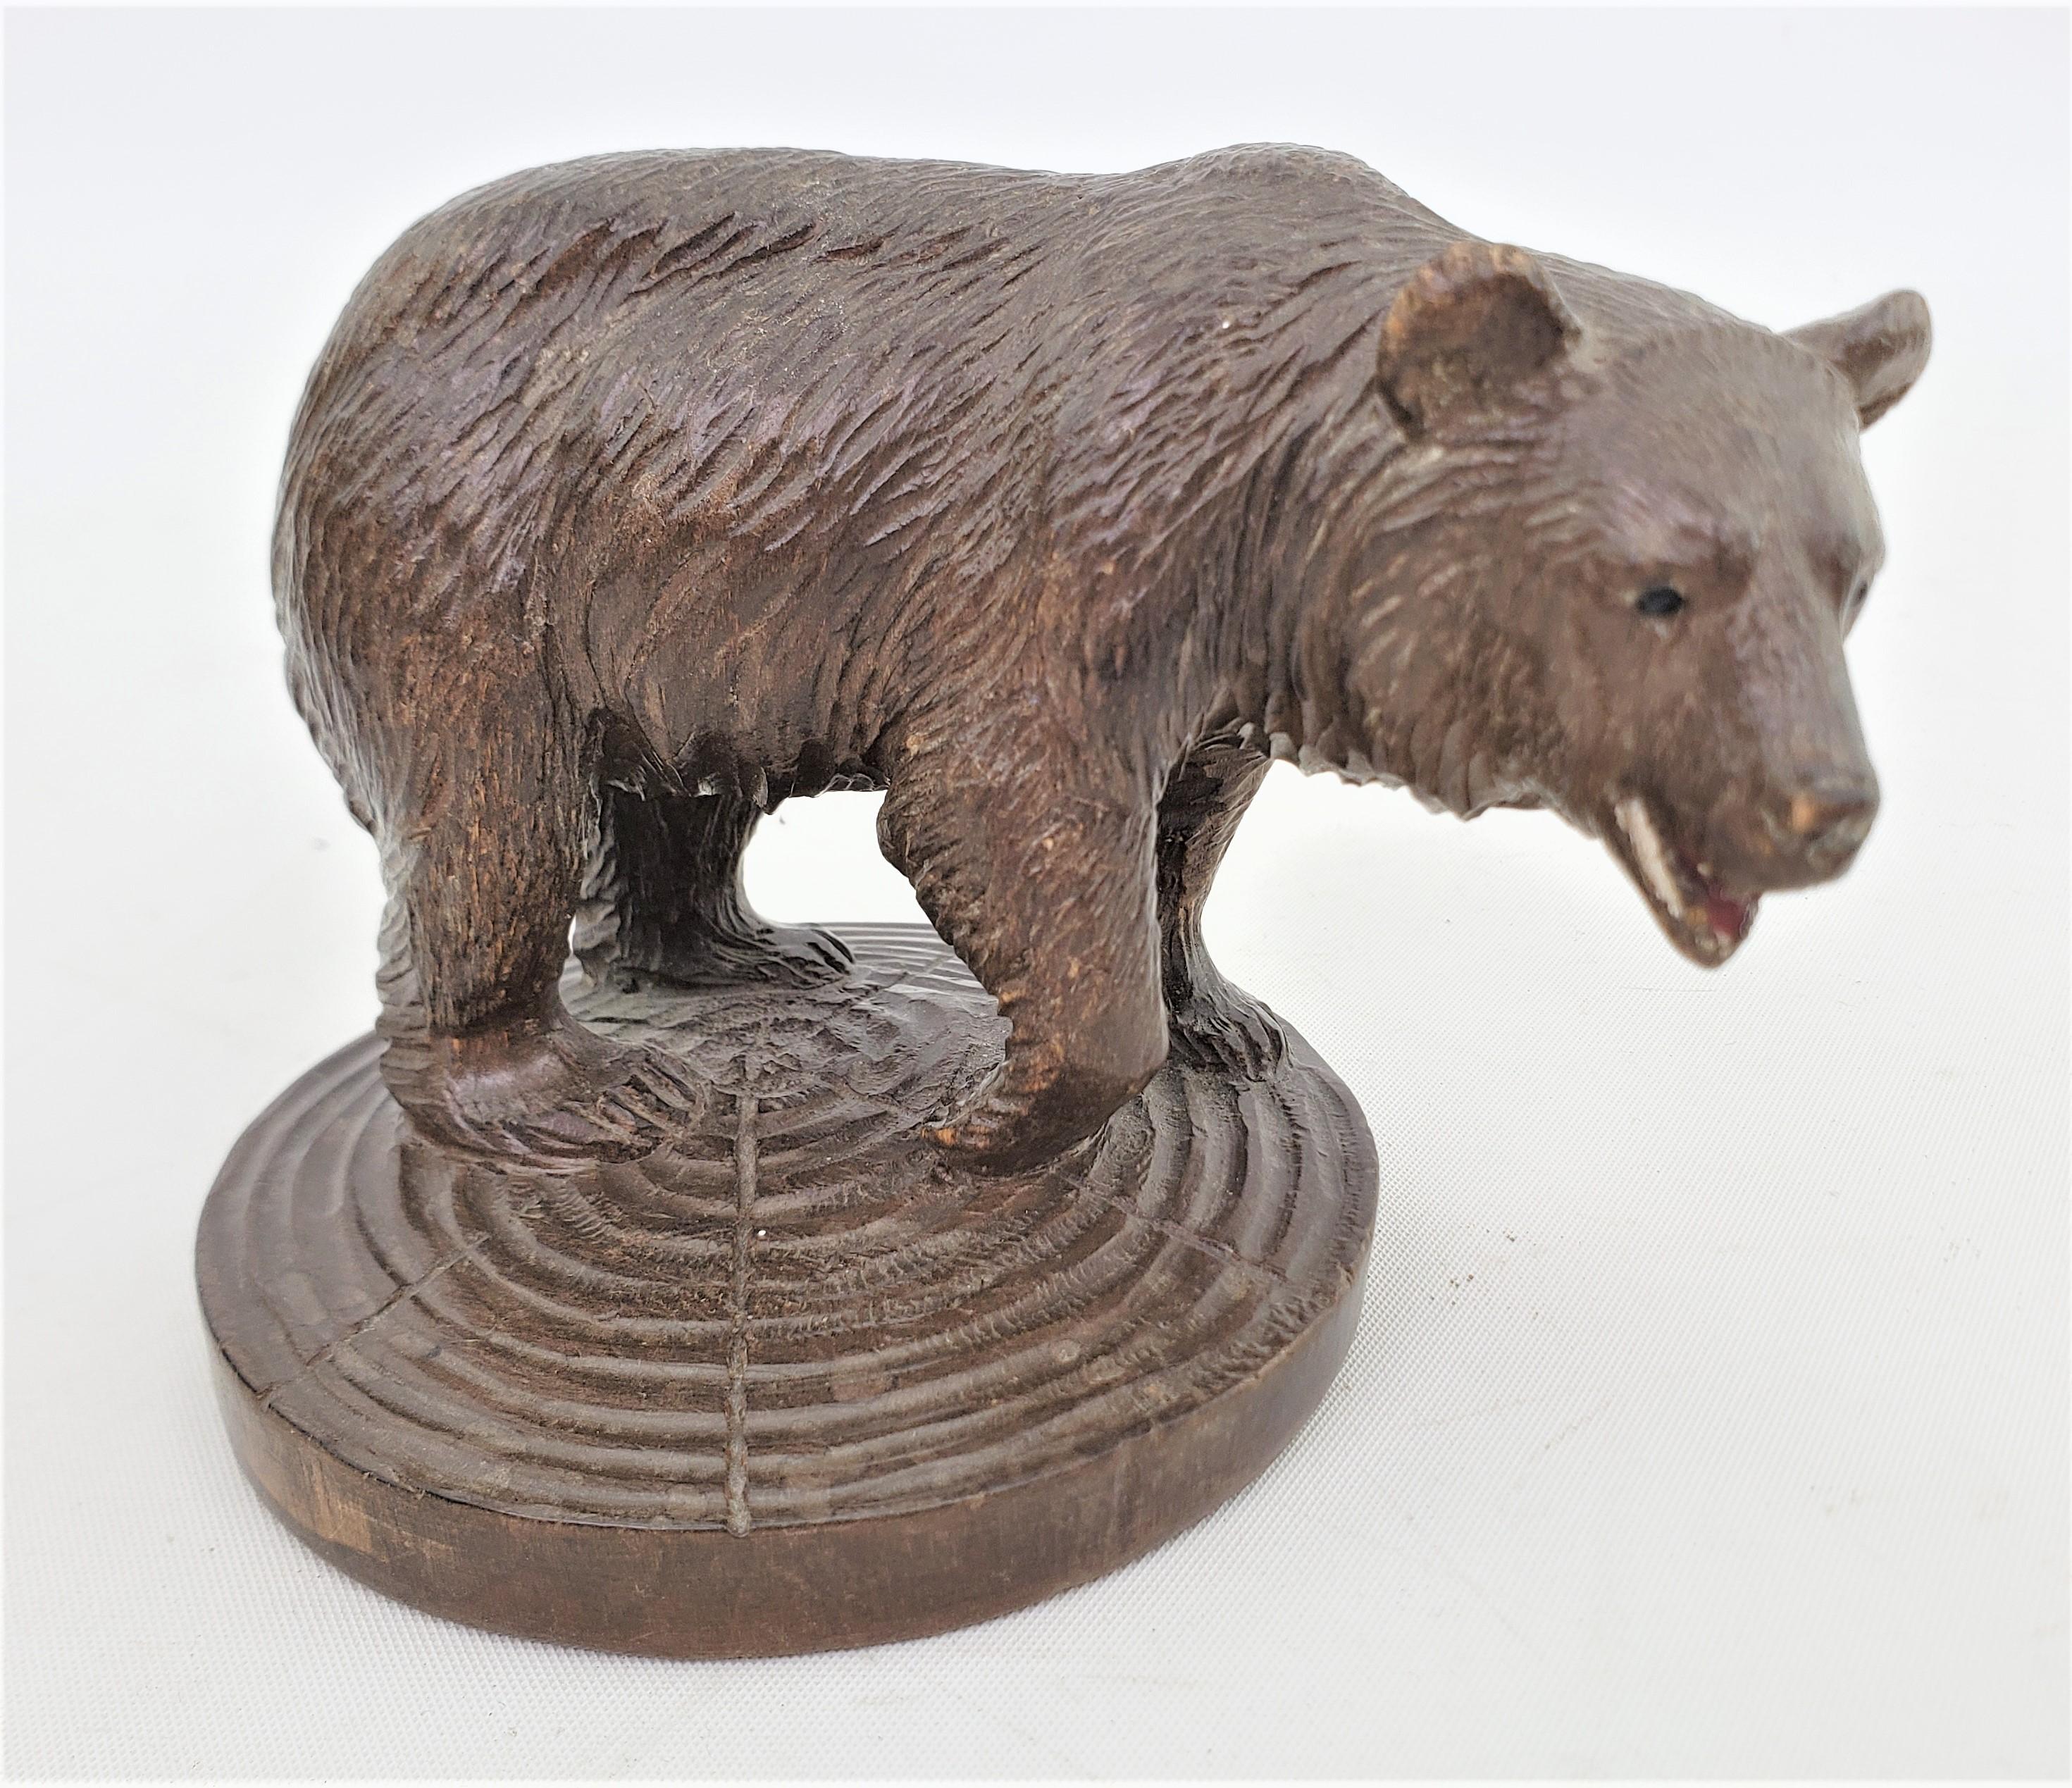 Antique Hand-Carved Black Forest Tobacco Jar or Humidor & Ashtray with Bears For Sale 8